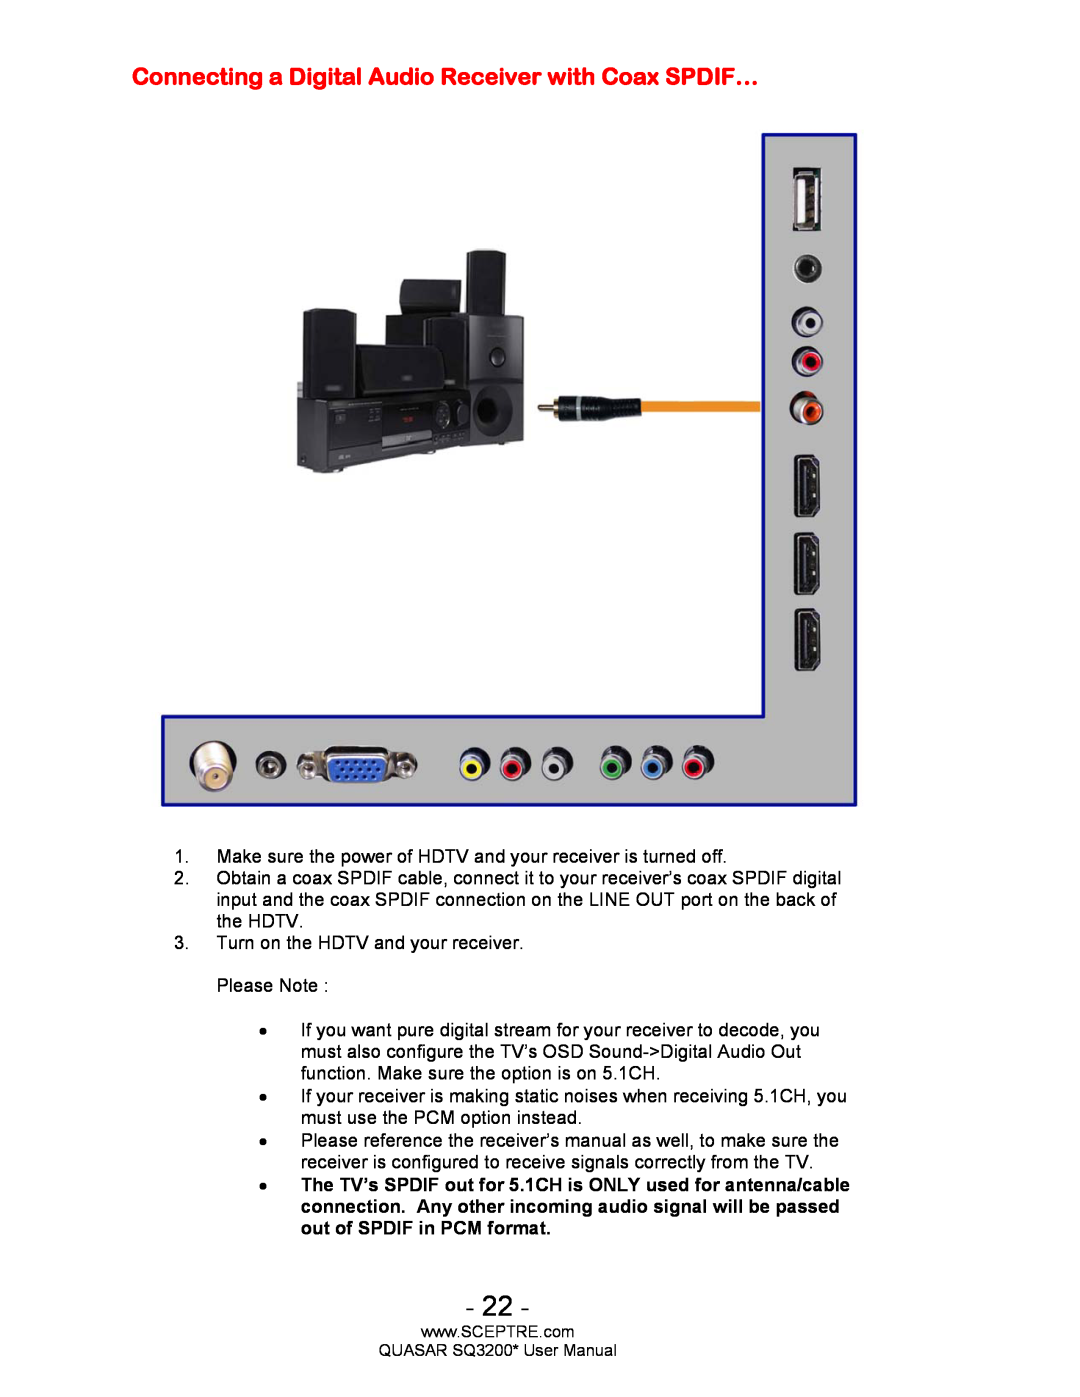 Sceptre Technologies HDTV, SQ3200 user manual Connecting a Digital Audio Receiver with Coax SPDIF… 